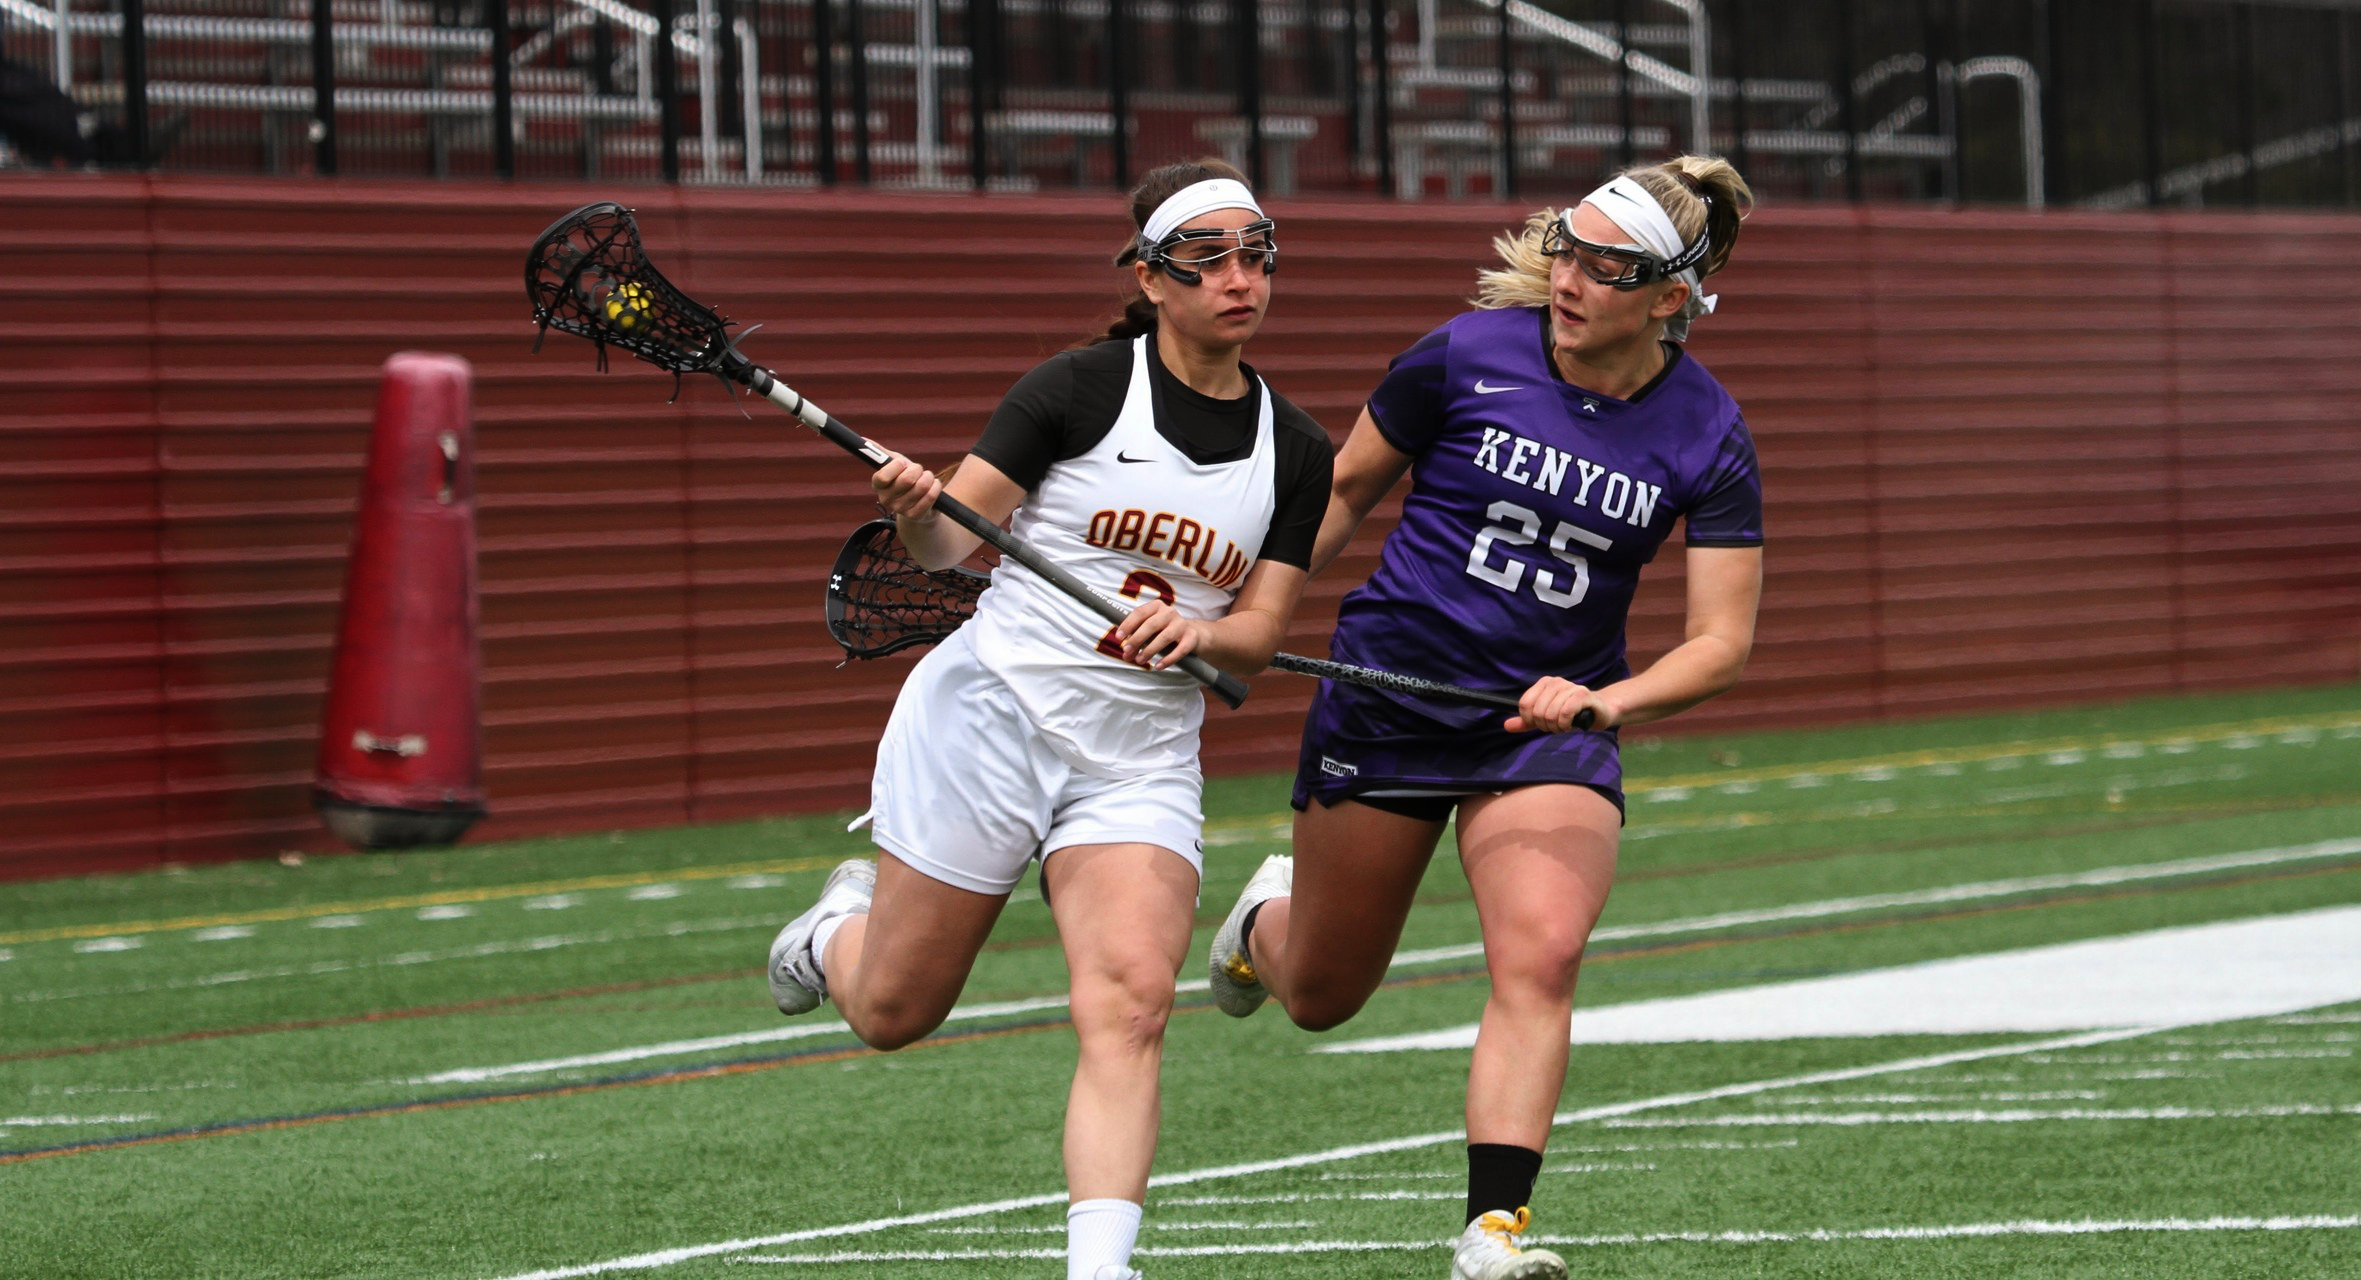 College senior and women’s lacrosse player Sabrina Deleonibus was recruited to play basketball at Oberlin, but quit after her first year to join the women’s lacrosse team. She is now one of the Yeowomen’s biggest offensive threats and a leader on the team.